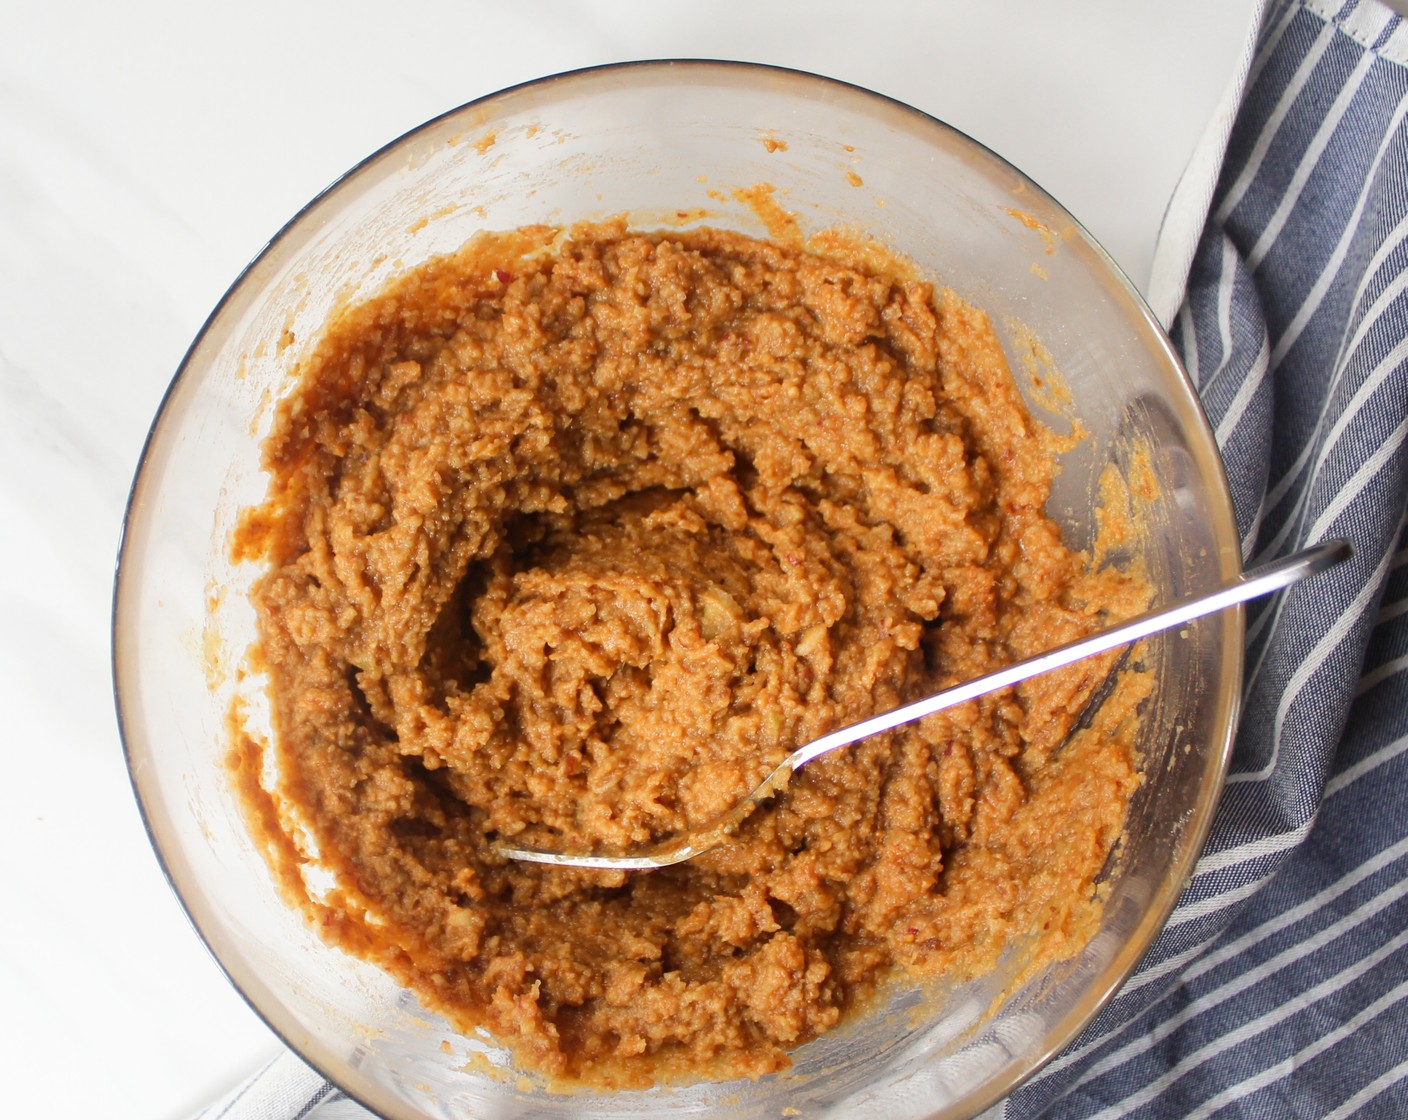 step 4 Transfer the paste in a mixing bowl and add in the Peanut Butter (1/2 cup) and Ground Cinnamon (1 tsp). Using a fork or spatula, combine until everything is well incorporated.